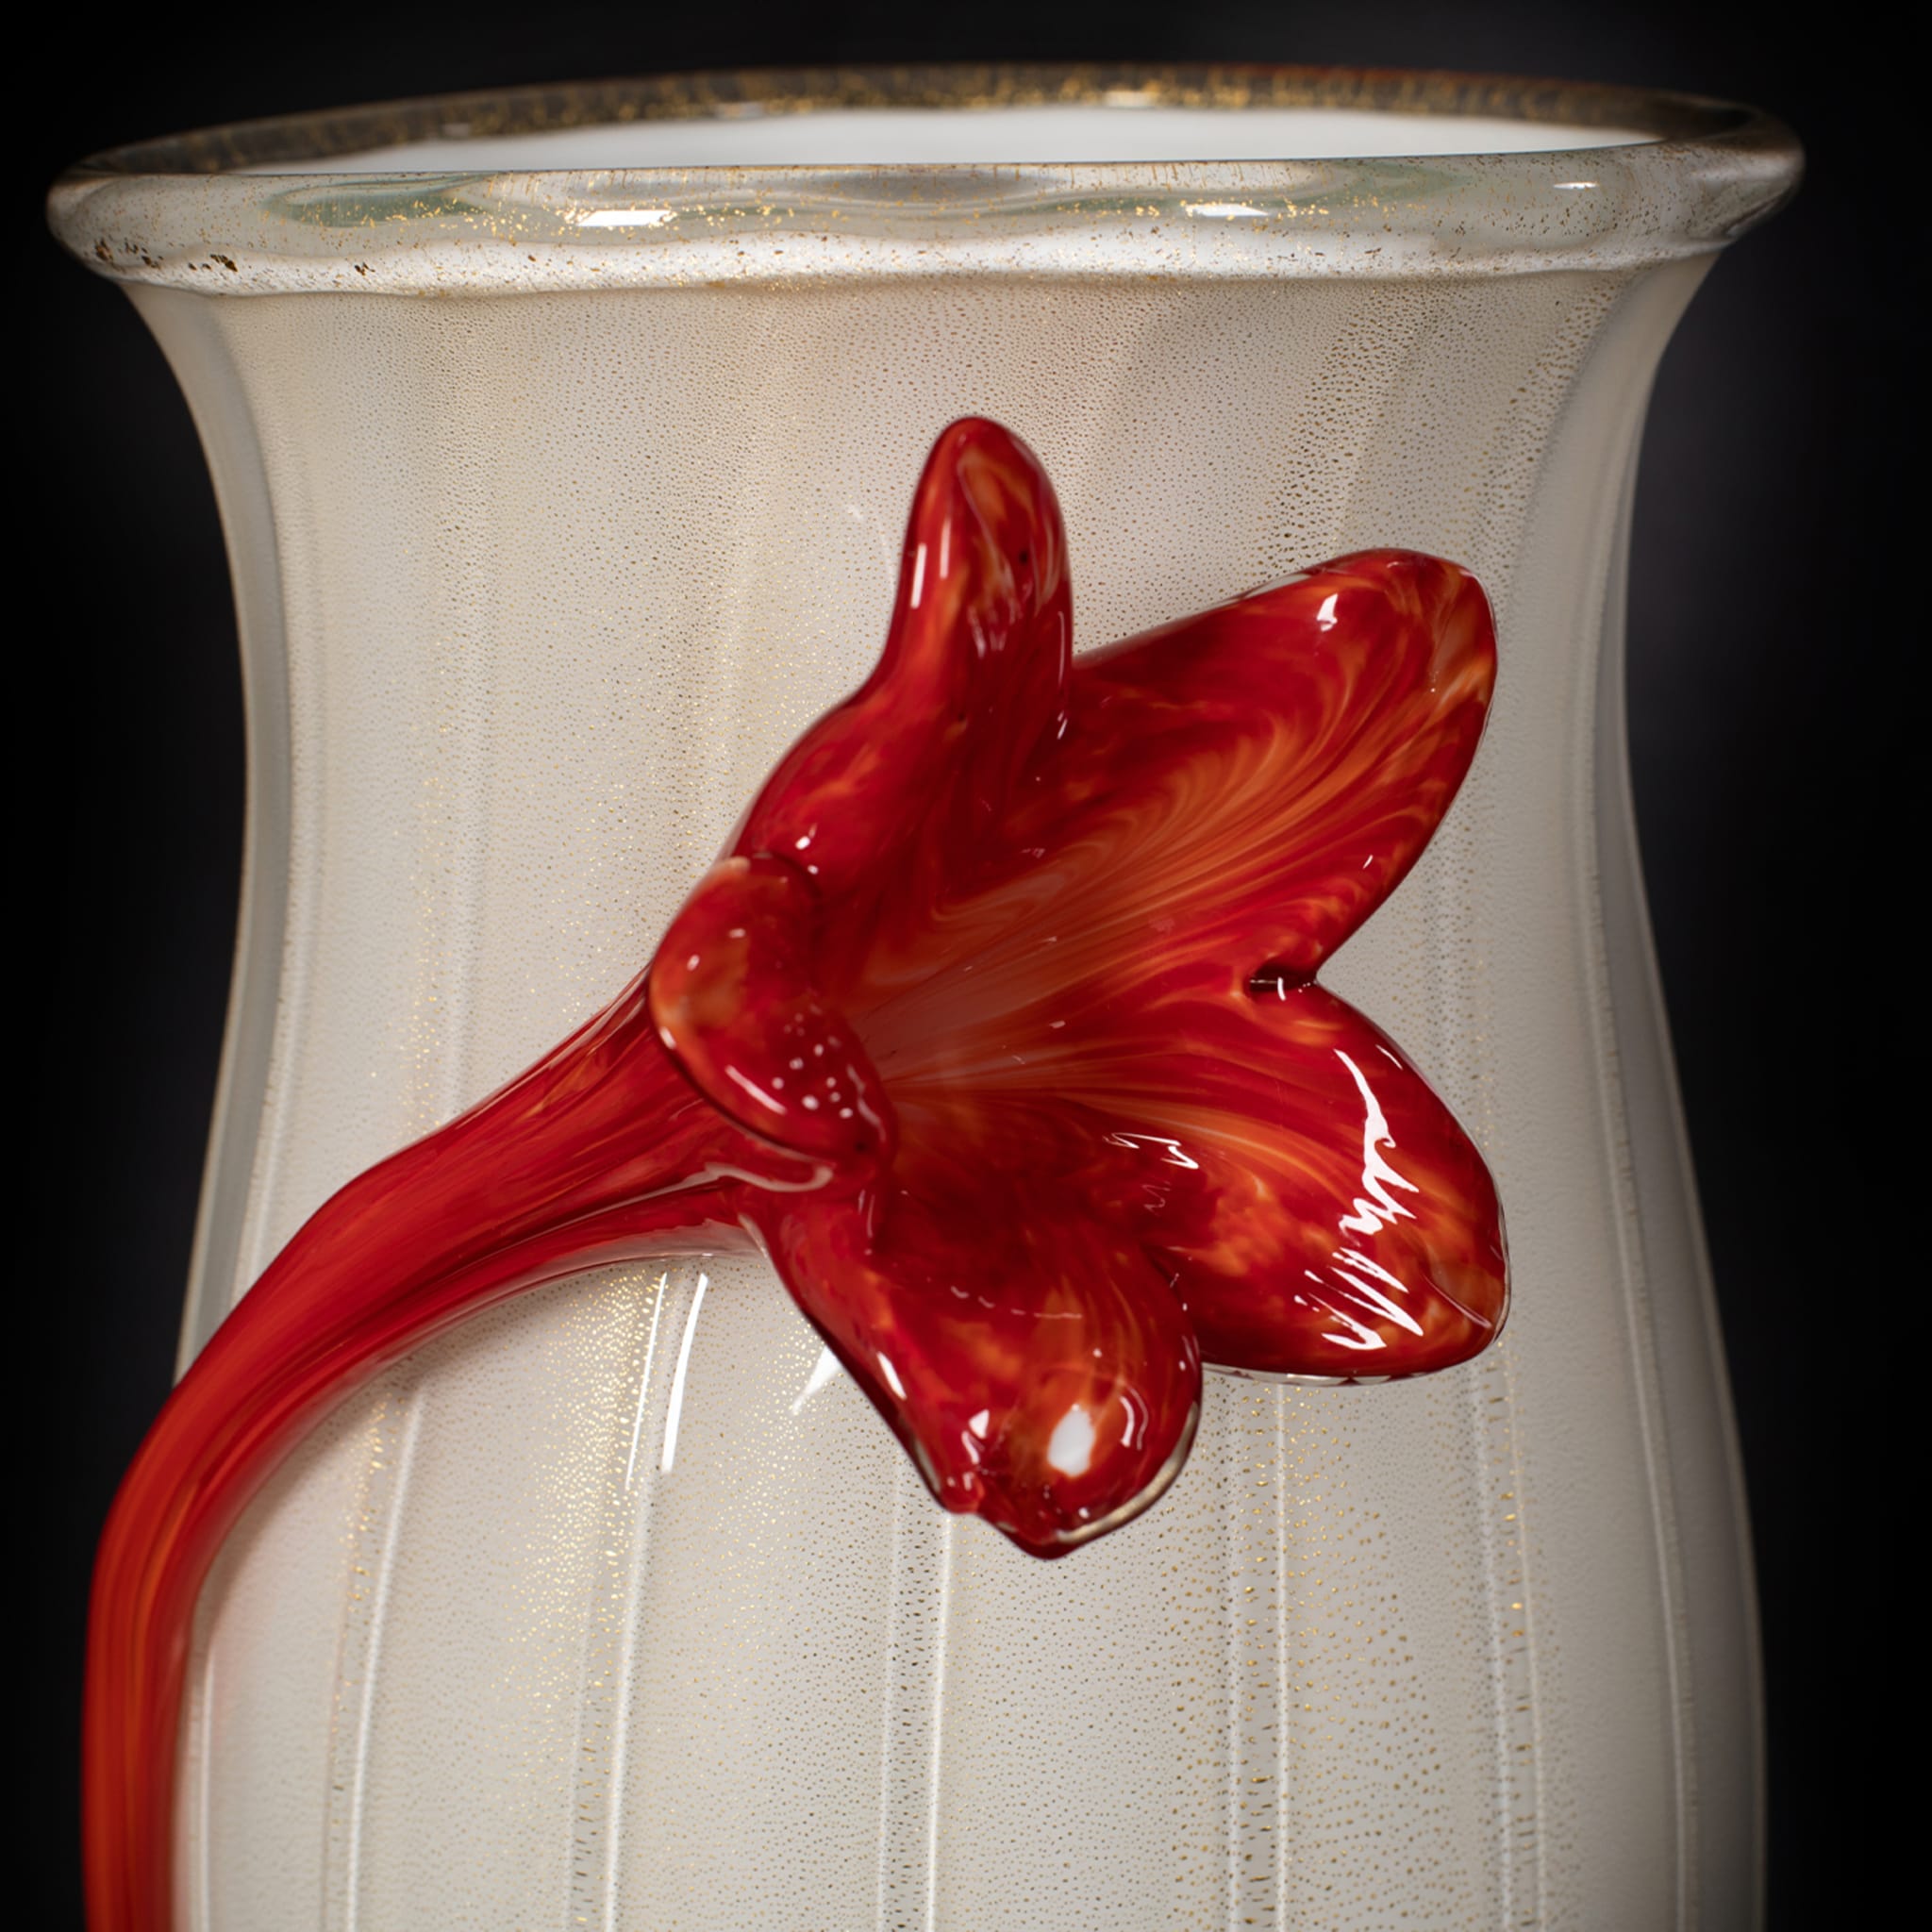 Stmat Polychrome Vase with Flowers - Alternative view 2